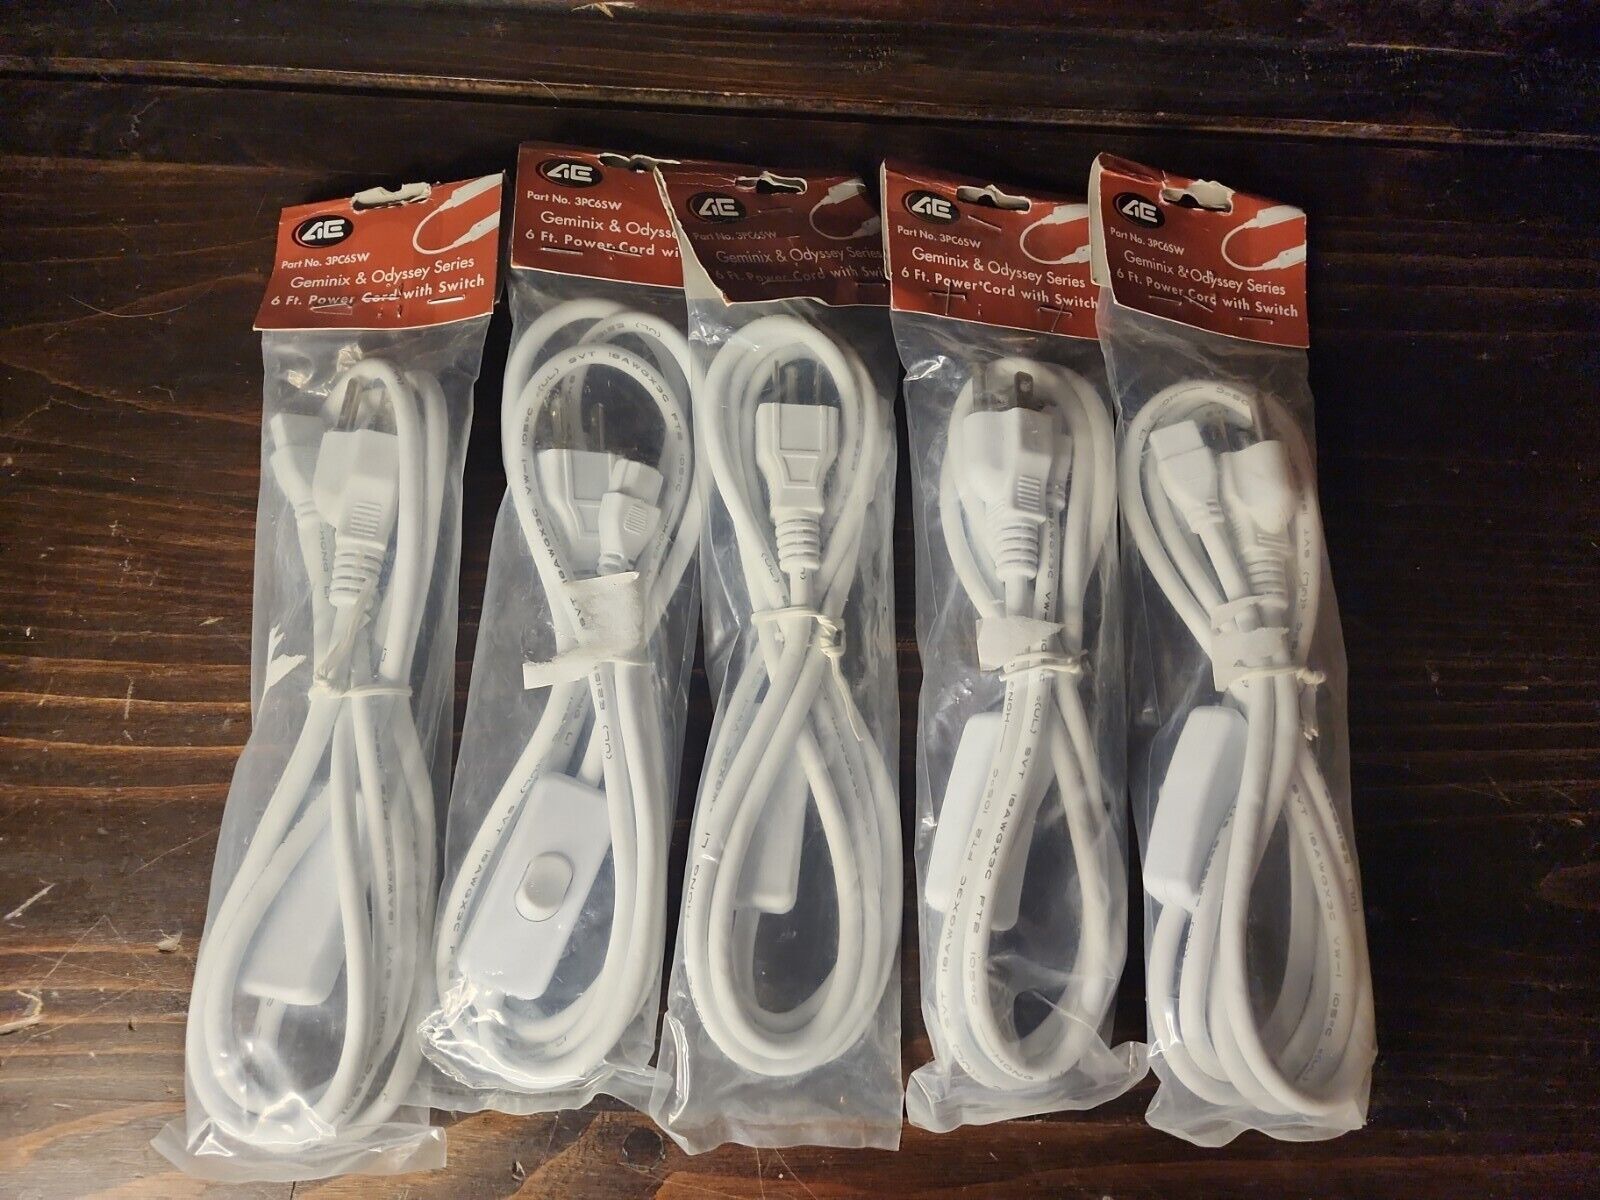 Lot Of 5 AE 3PC6SW Geminix & Odyssey Series 6FT Power Cord With Switch